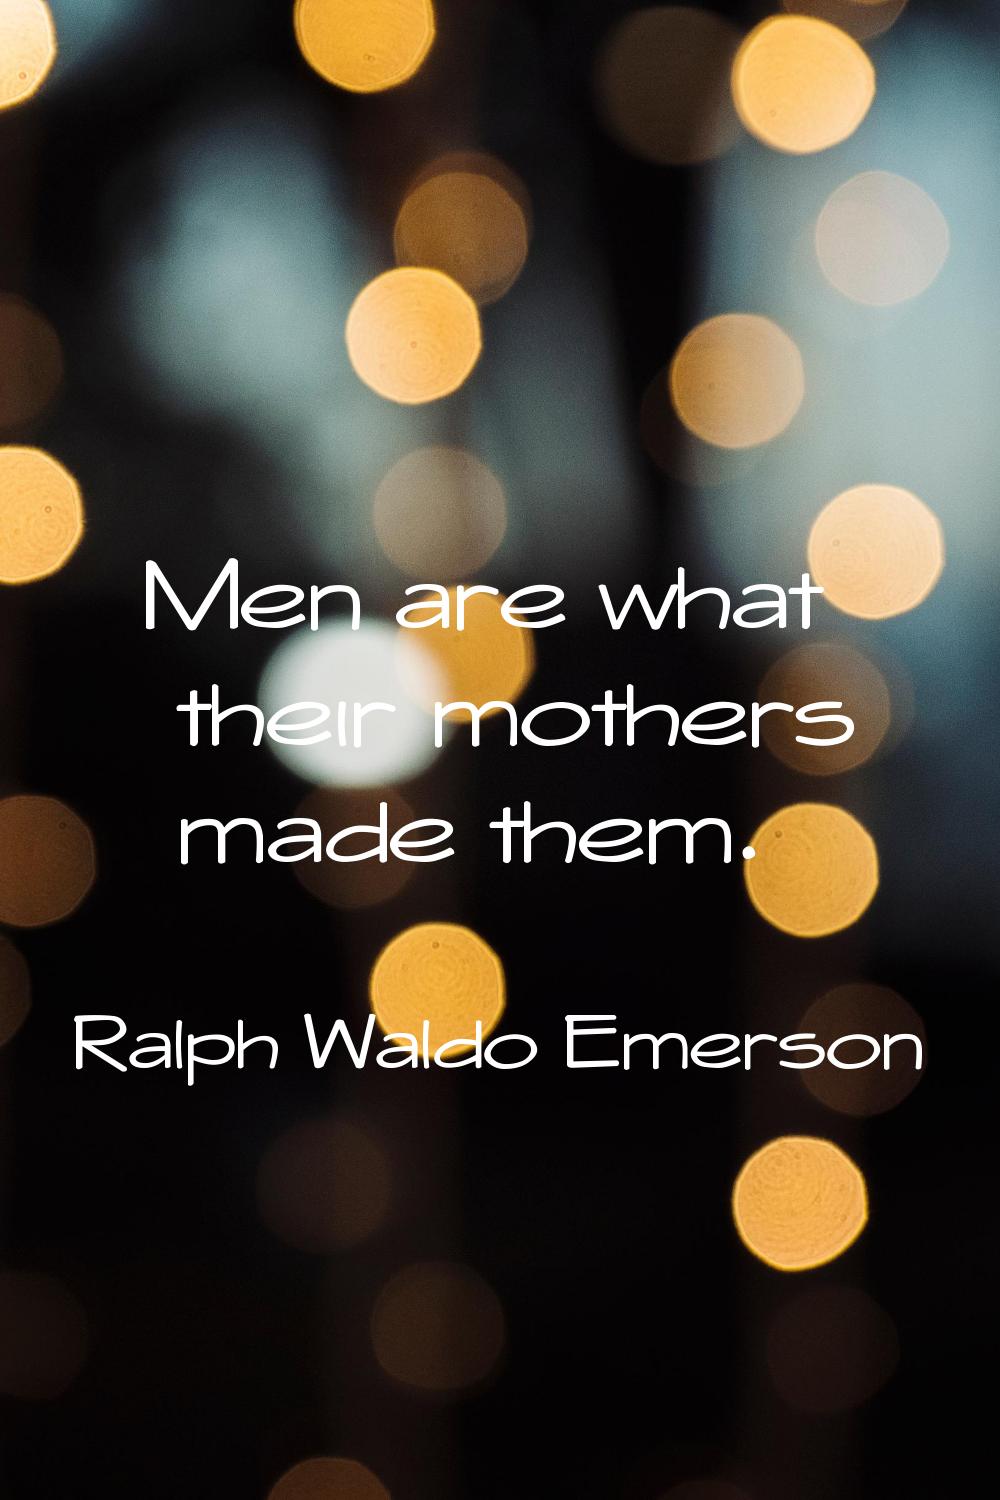 Men are what their mothers made them.